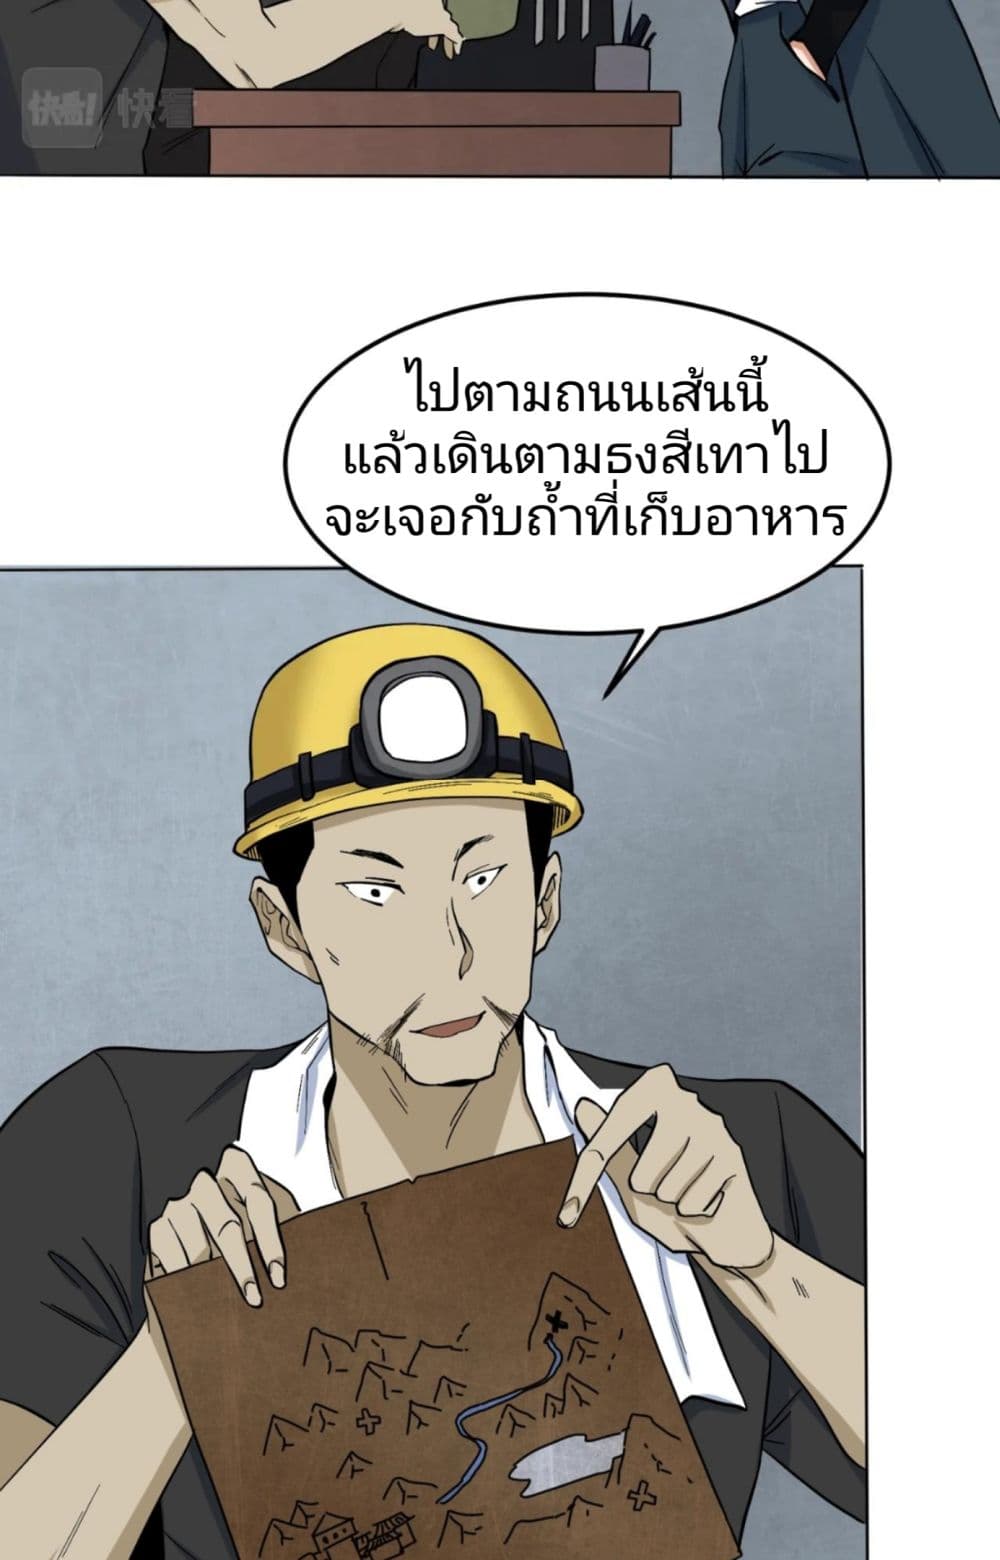 The Age of Ghost Spirits à¸à¸­à¸à¸à¸µà¹ 6 (26)